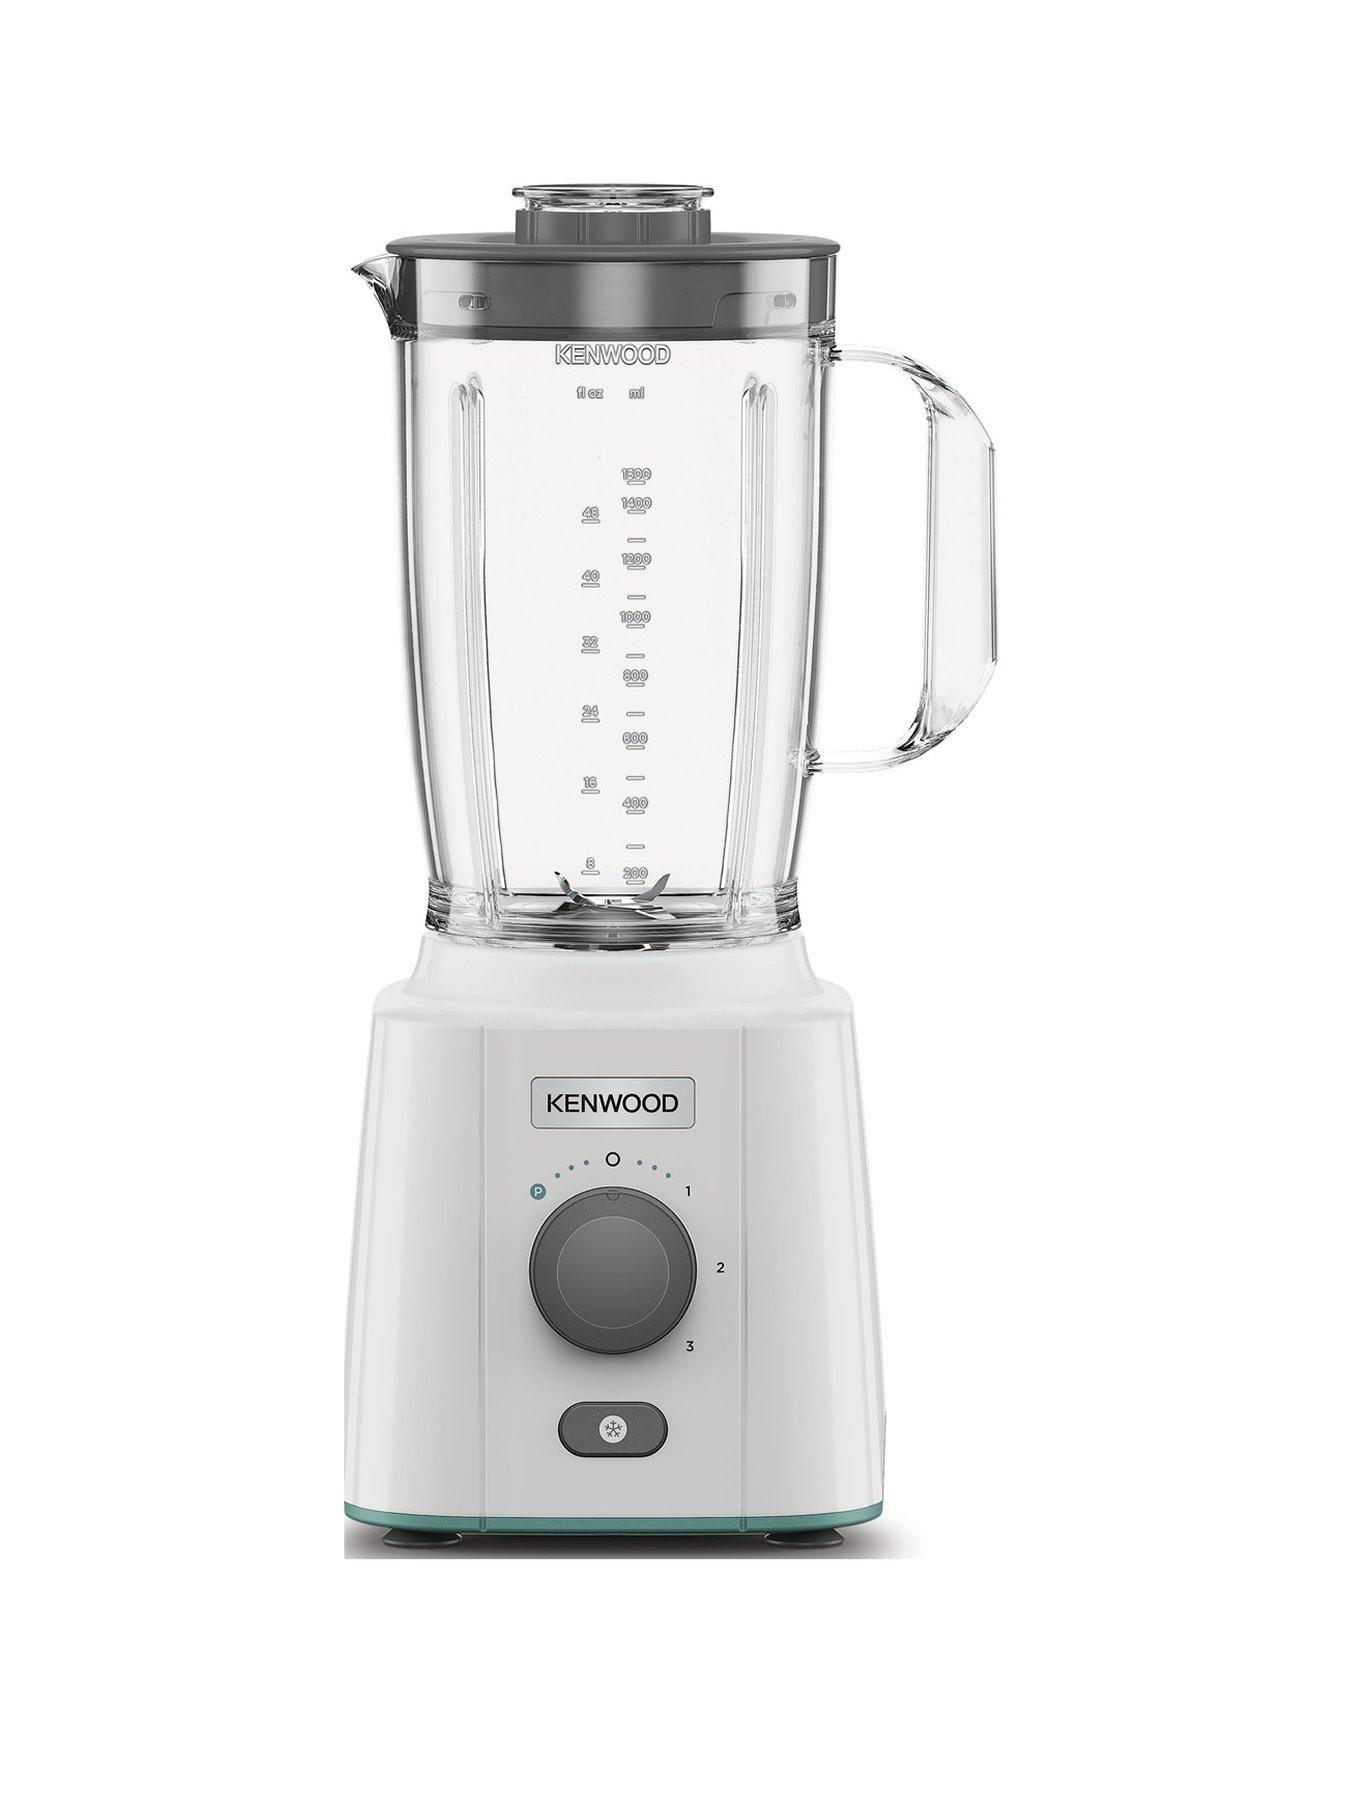 Kenwood 1.5L Smoothie Maker - Silver – The Culinarium